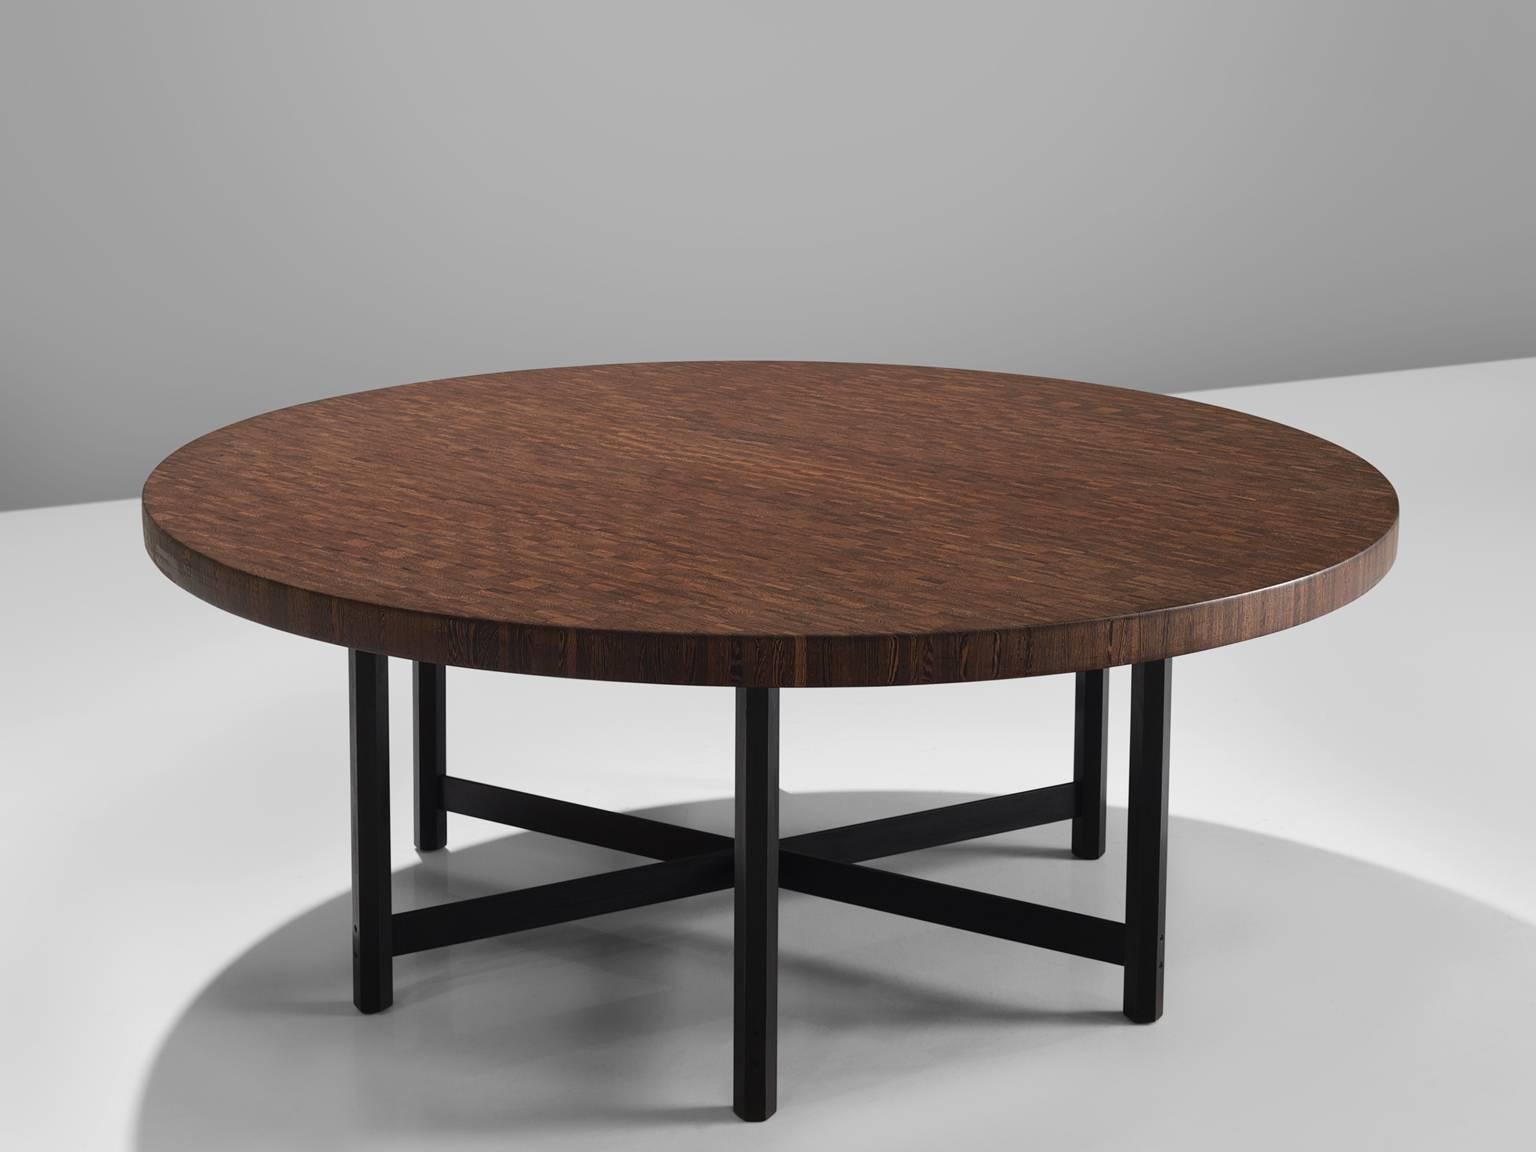 Jules Wabbes for Mobilier Universel, wenge and metal with canon de fusil metal, Belgium, 1960s. 

This large wenge table is part of the midcentury design collection. This large round table one of Jules Wabbes personal favourites. The top is executed